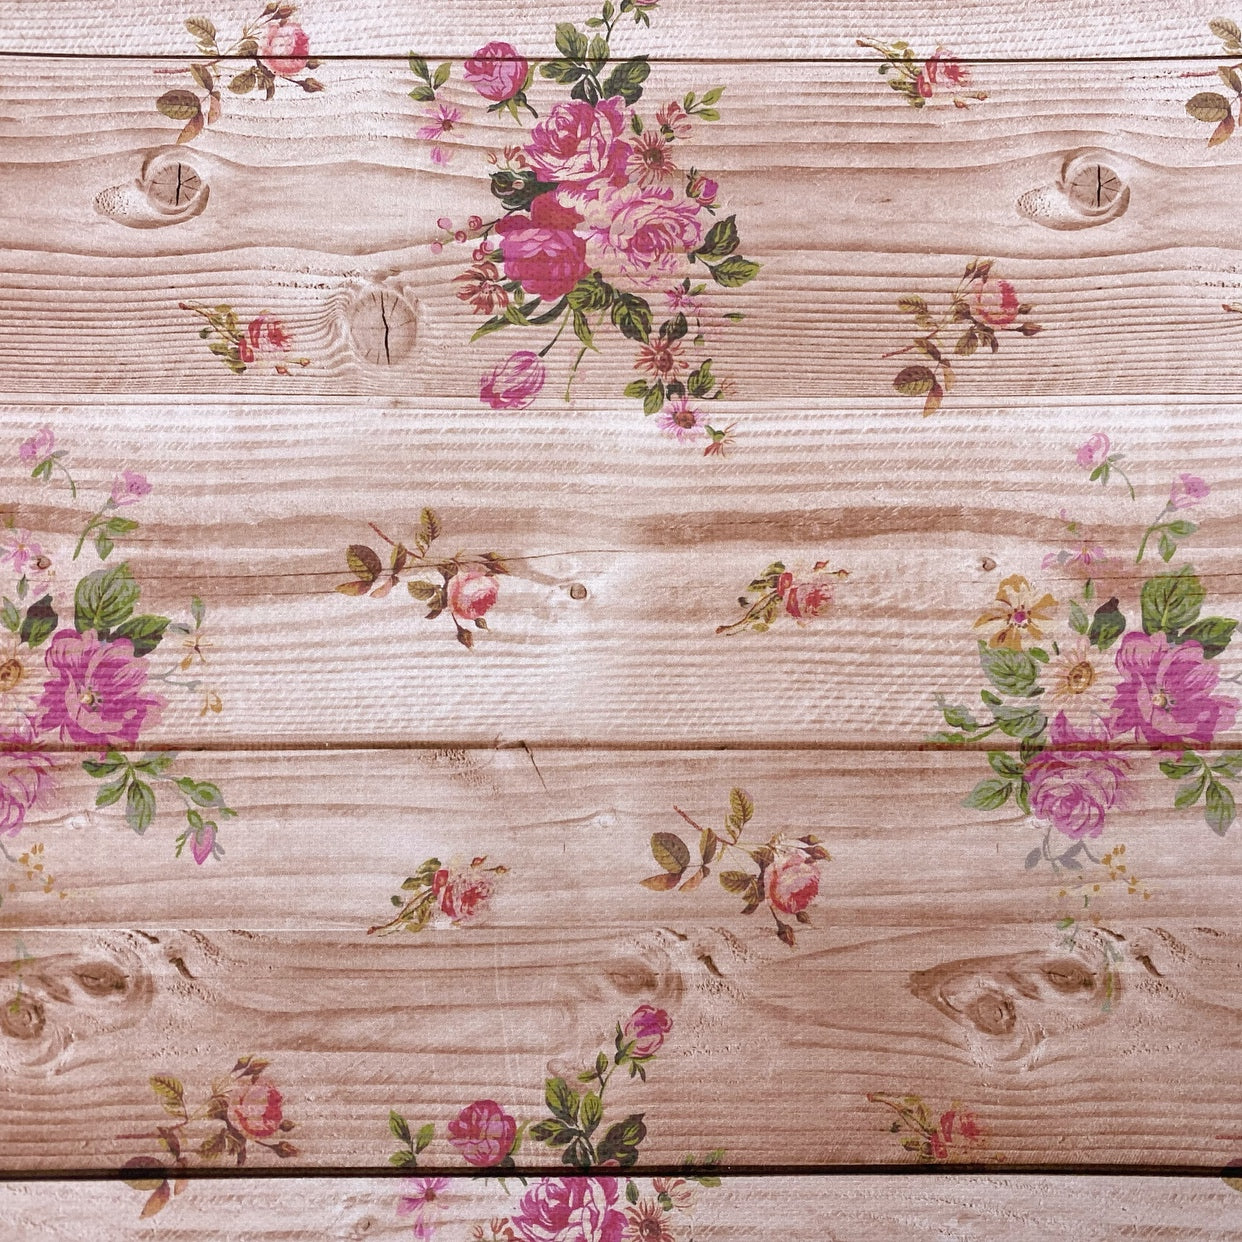 Darker Wood Floral Effect Canvas Photography Background